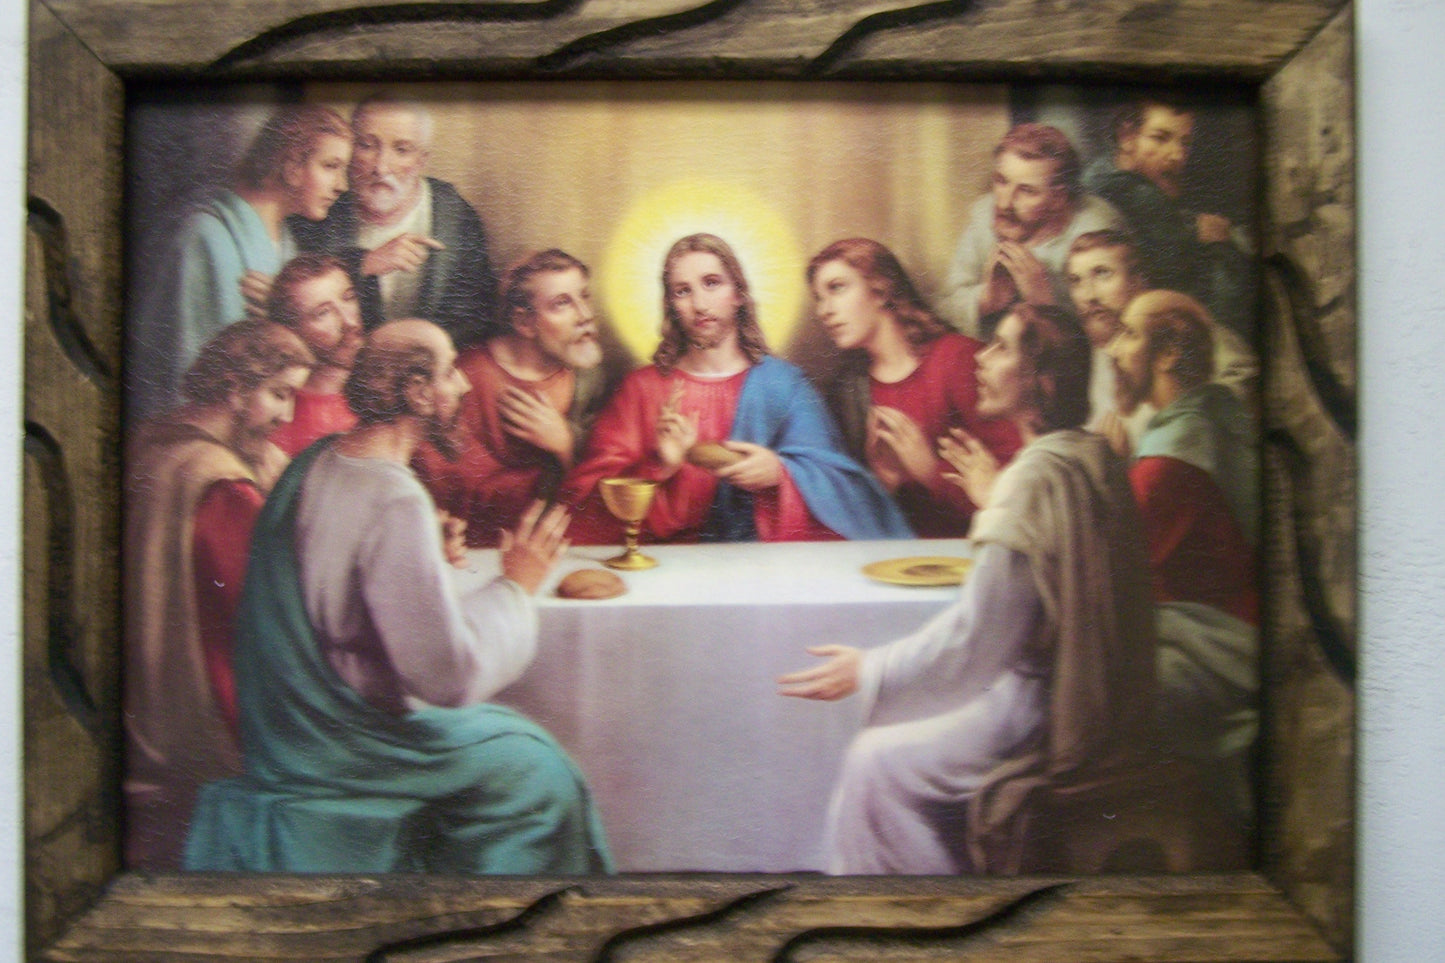 Framed Giclee Print - Last Supper, Type 2 - Mexico